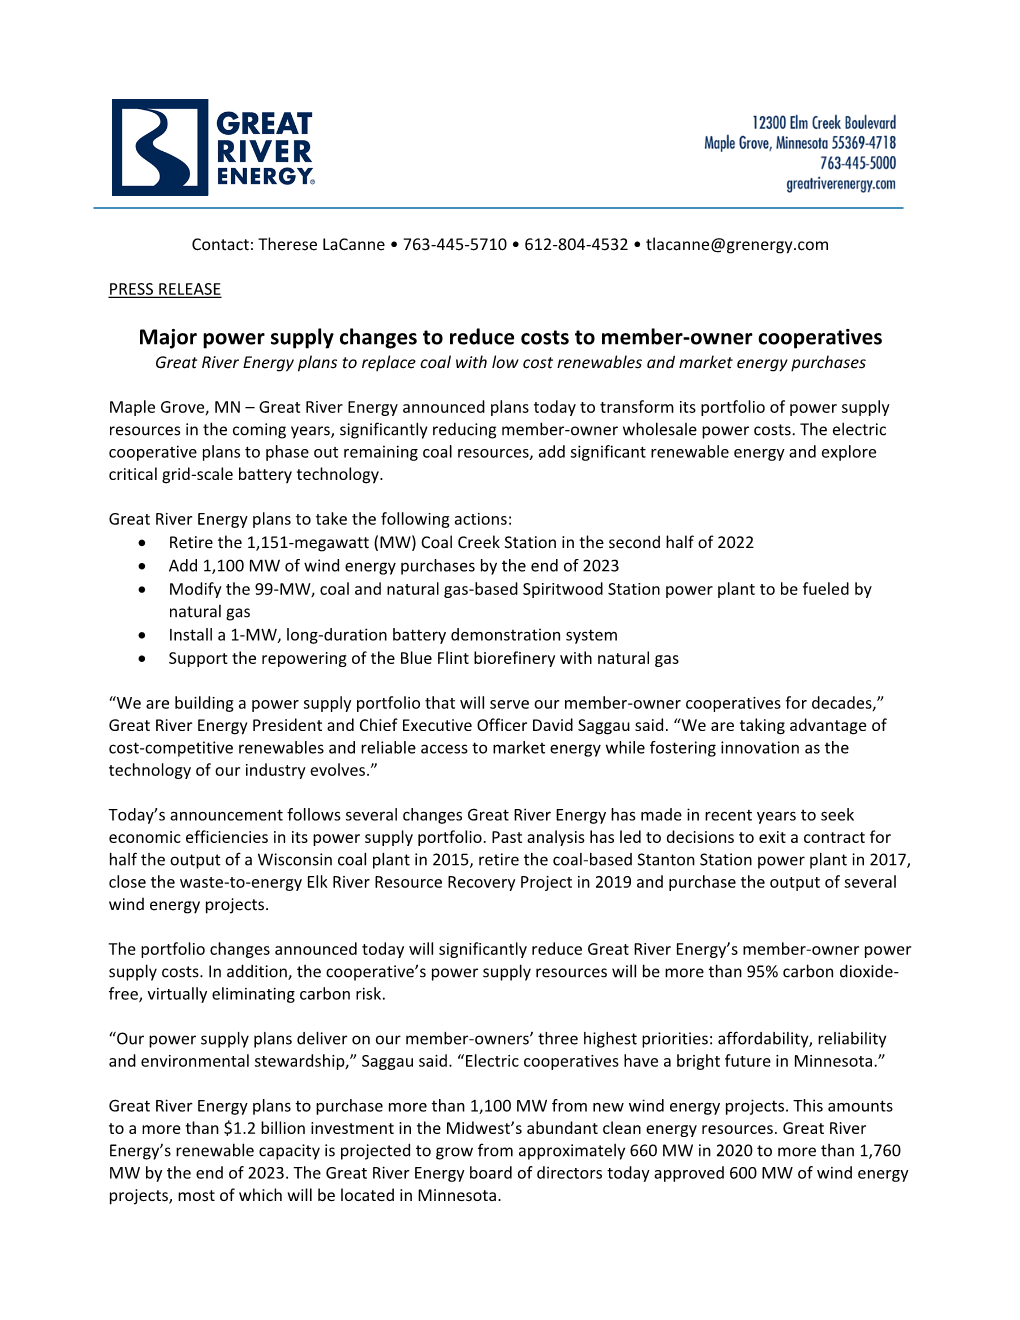 Major Power Supply Changes to Reduce Costs to Member-Owner Cooperatives Great River Energy Plans to Replace Coal with Low Cost Renewables and Market Energy Purchases